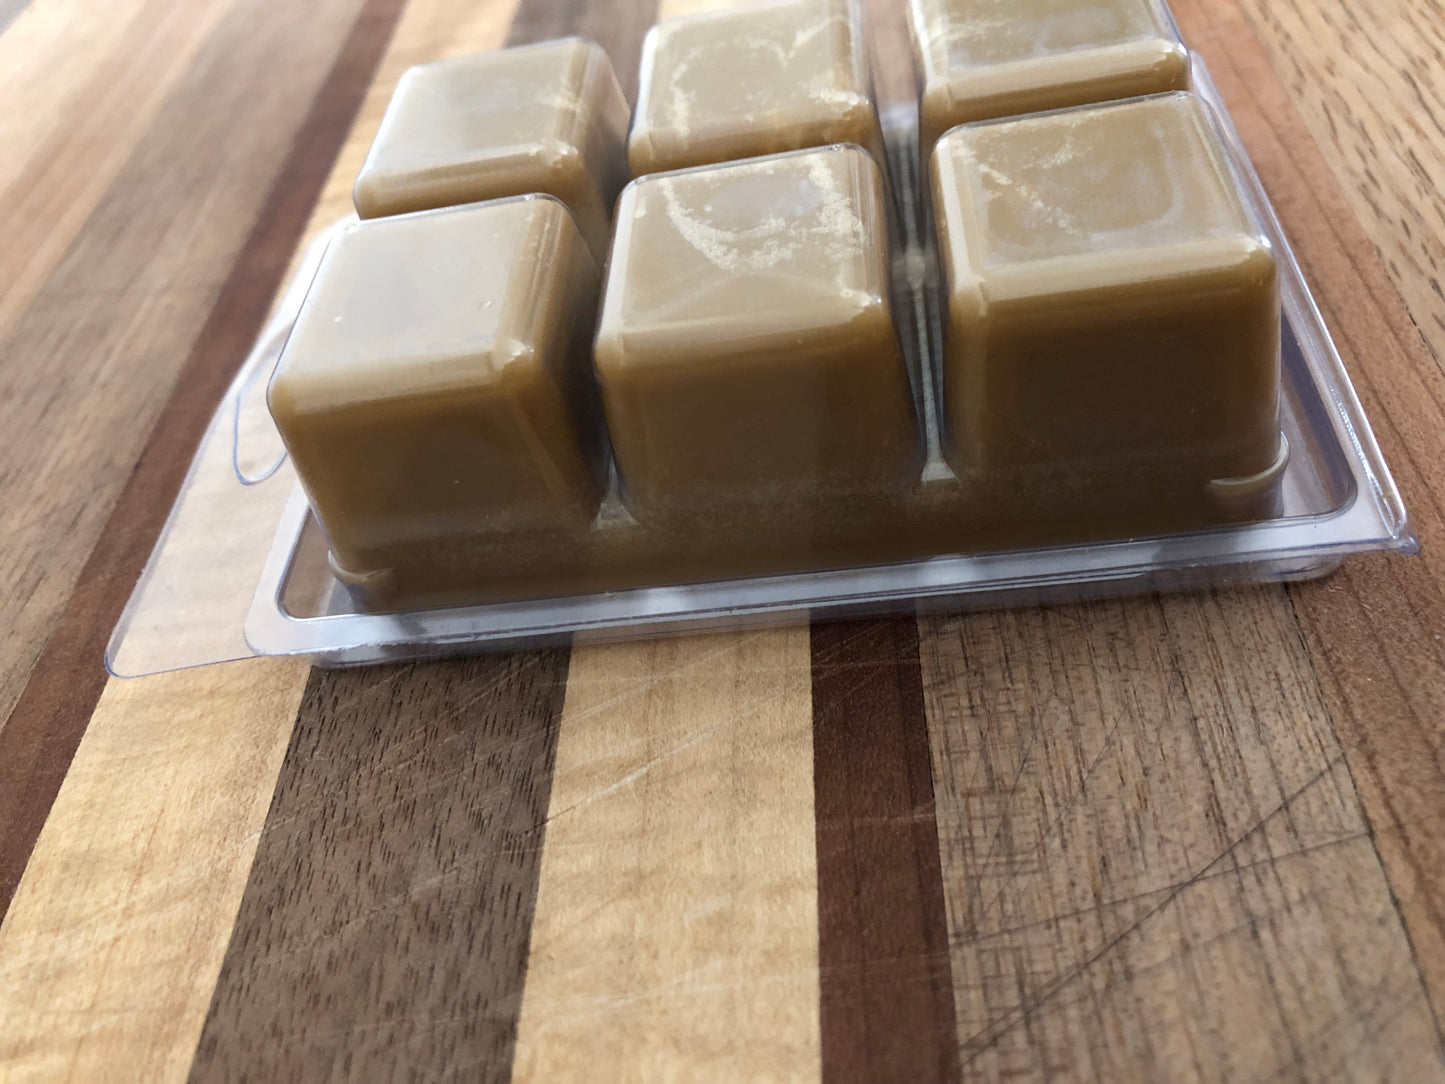 Handcrafted Athena's Coffee Shop Natural Soy Wax Melts